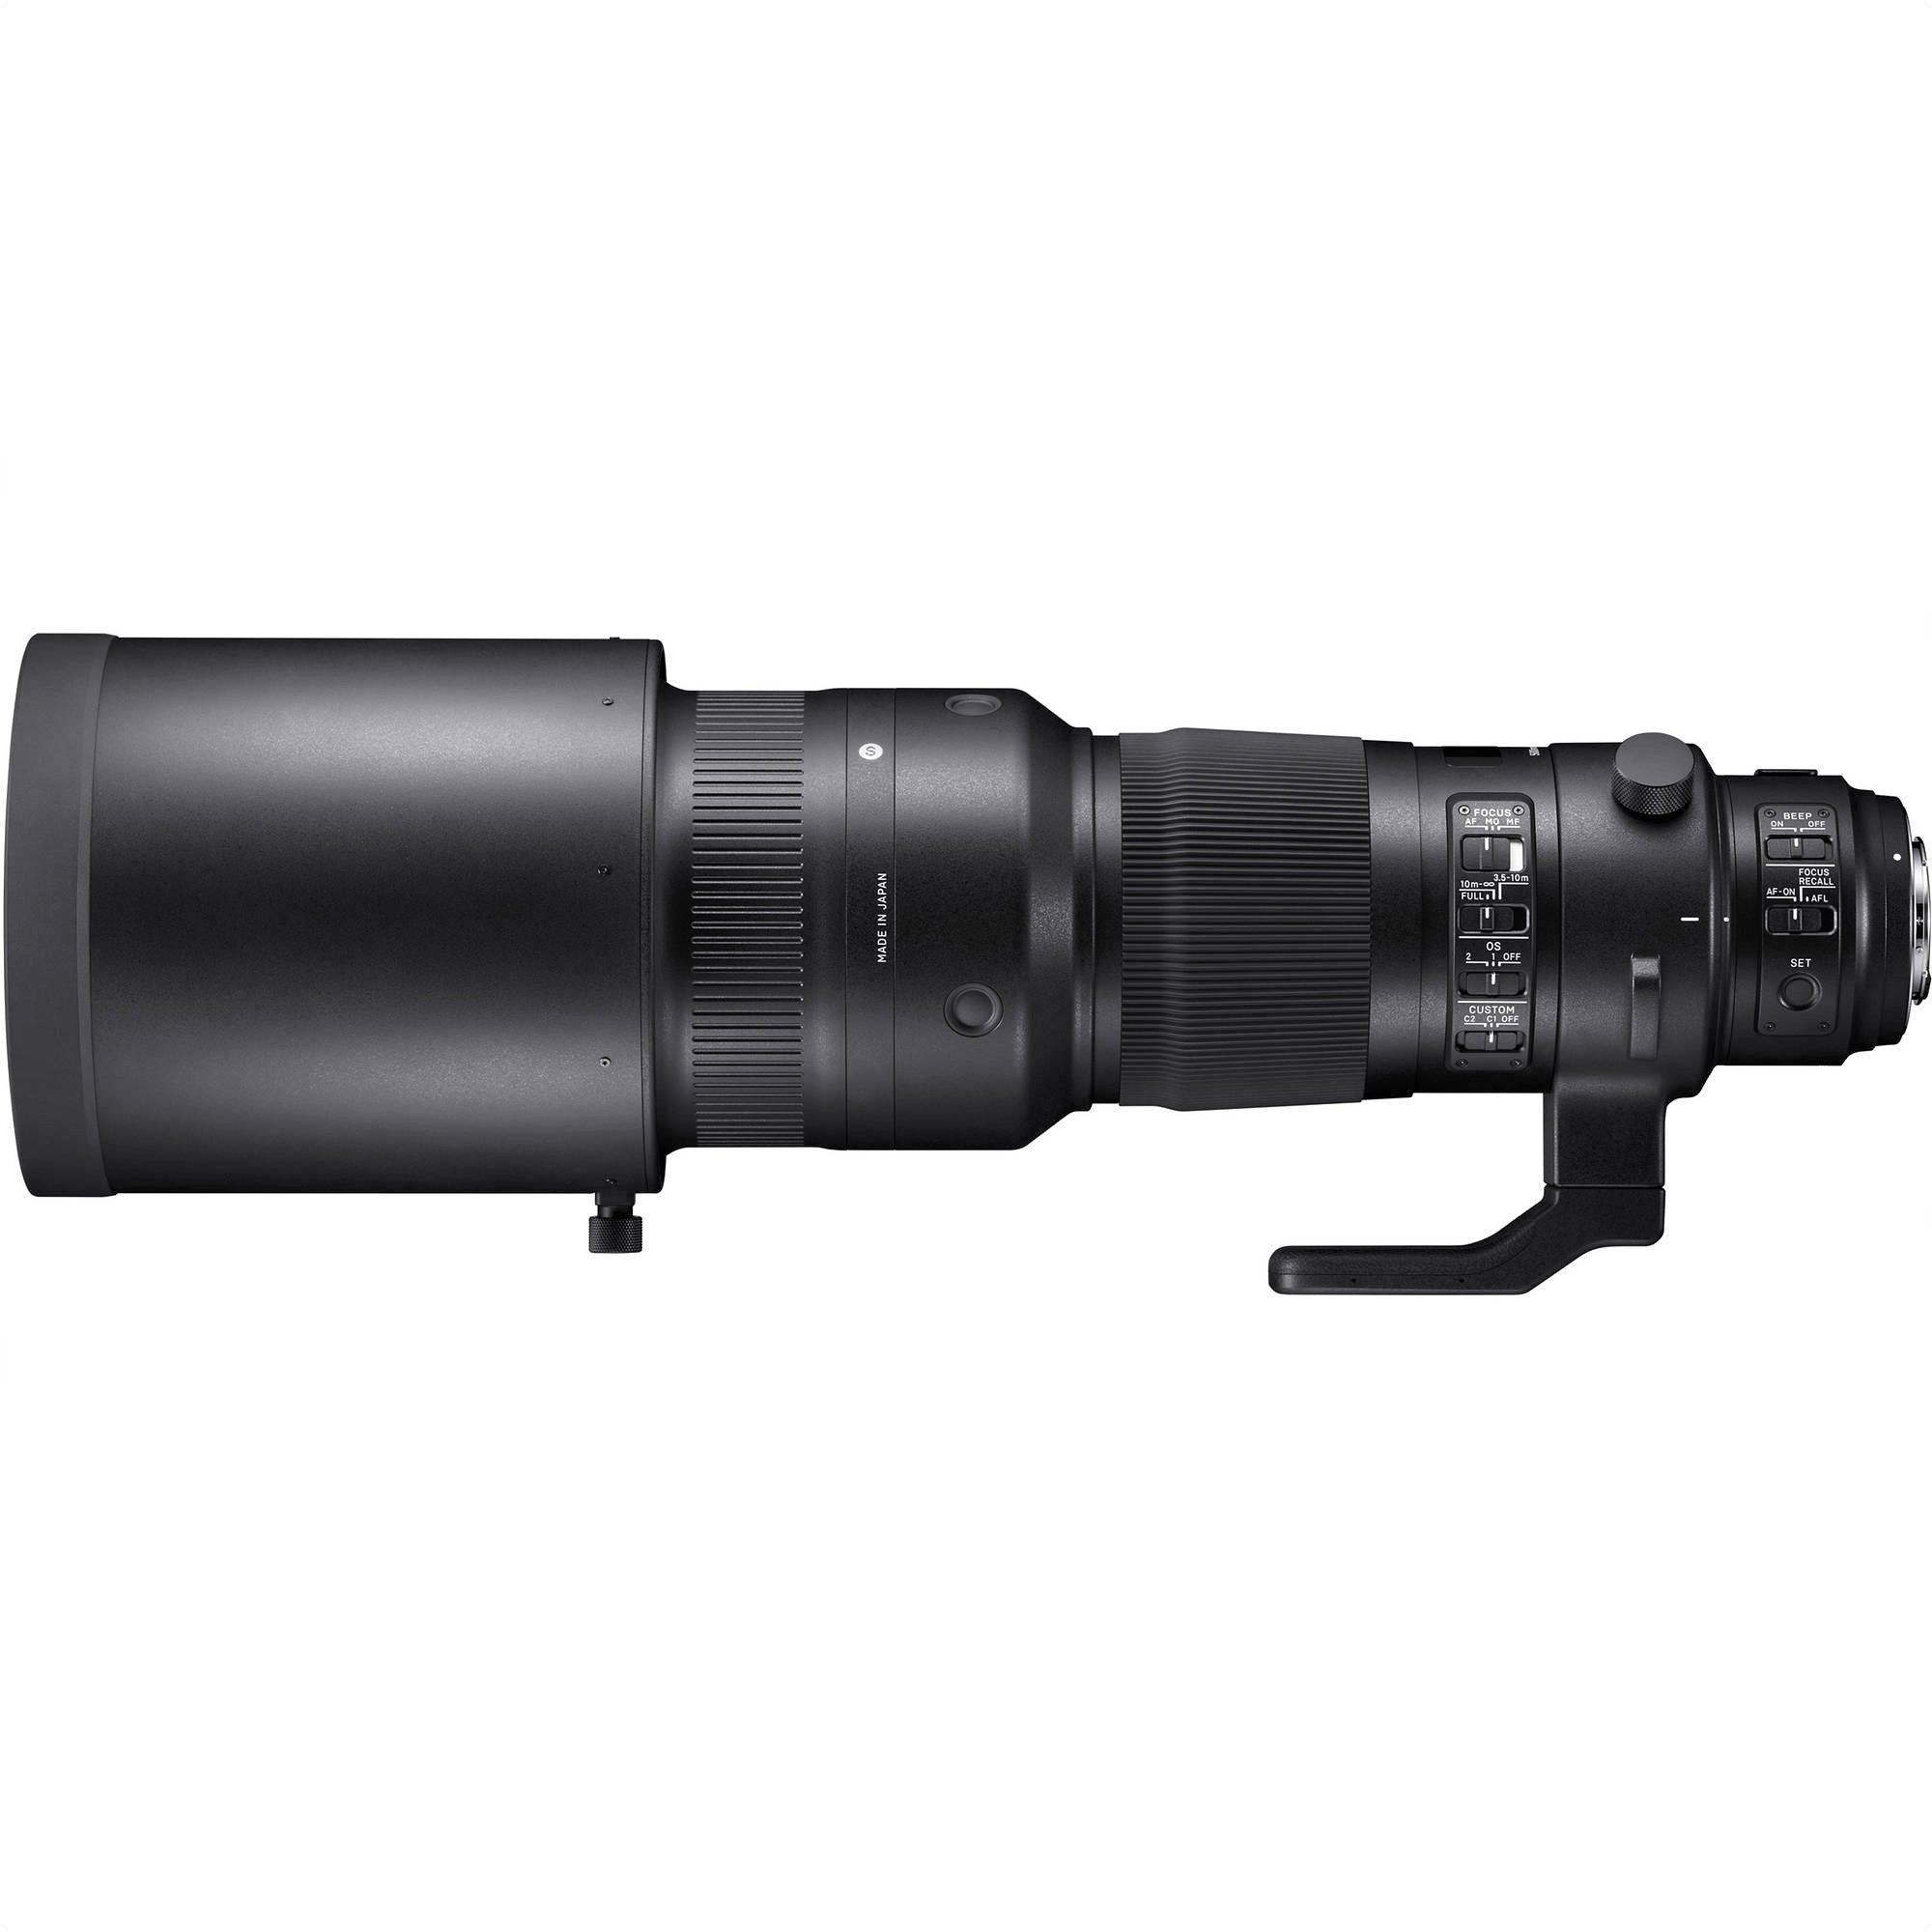 Sigma 500mm F4.0 DG OS HSM Sports Lens for Sigma SA with Attached Lens Hood on the Left Side